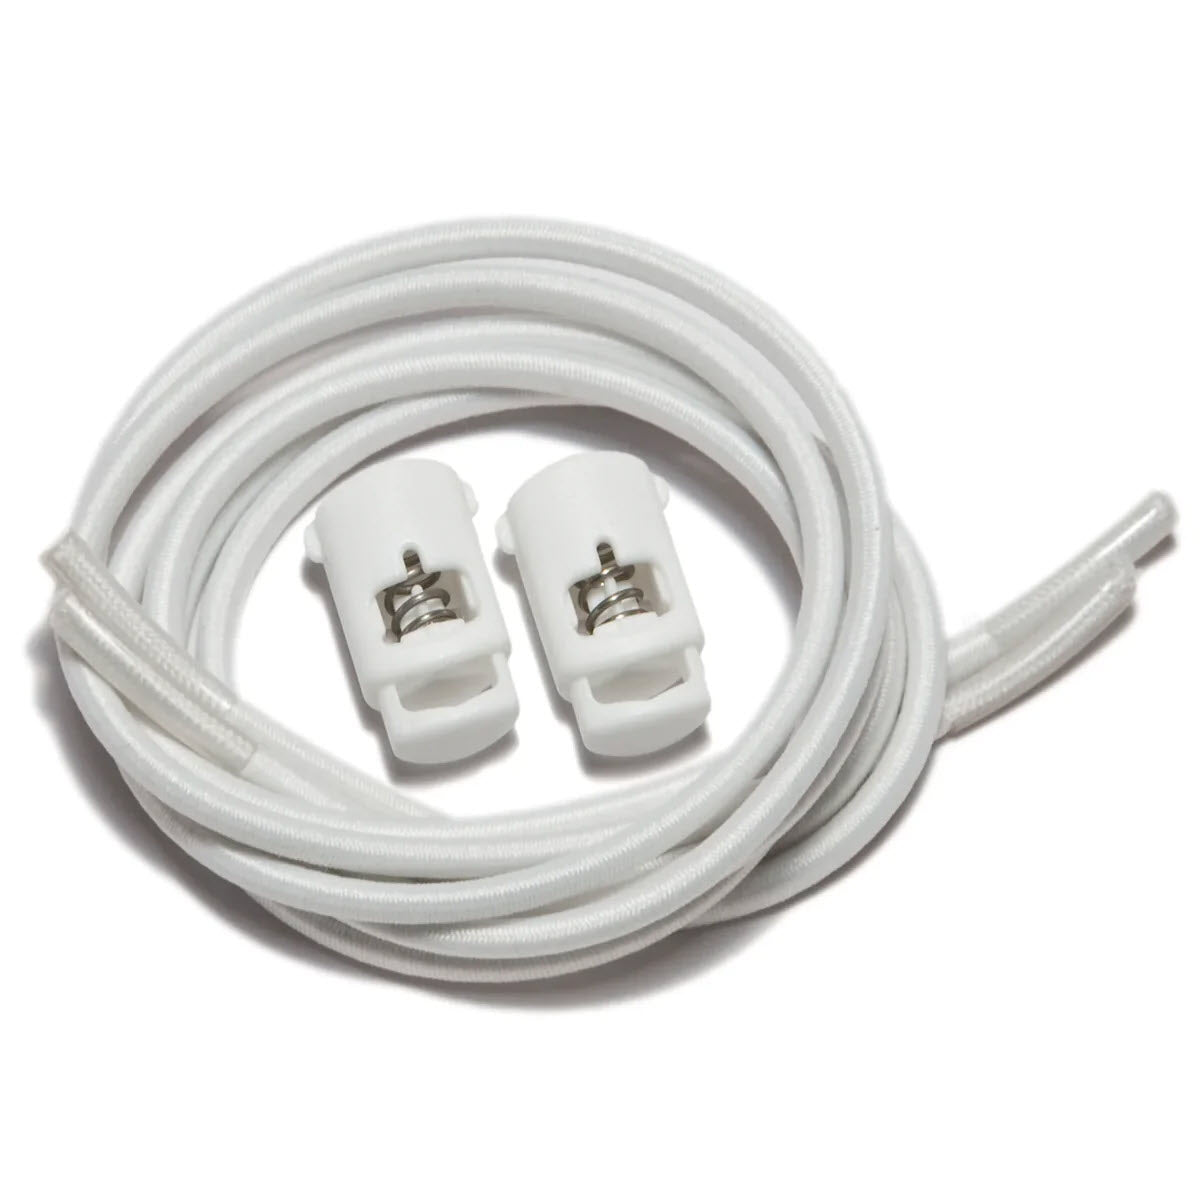 White Speed Laces cord with two metal spring-loaded lace locks, coiled against a plain background.